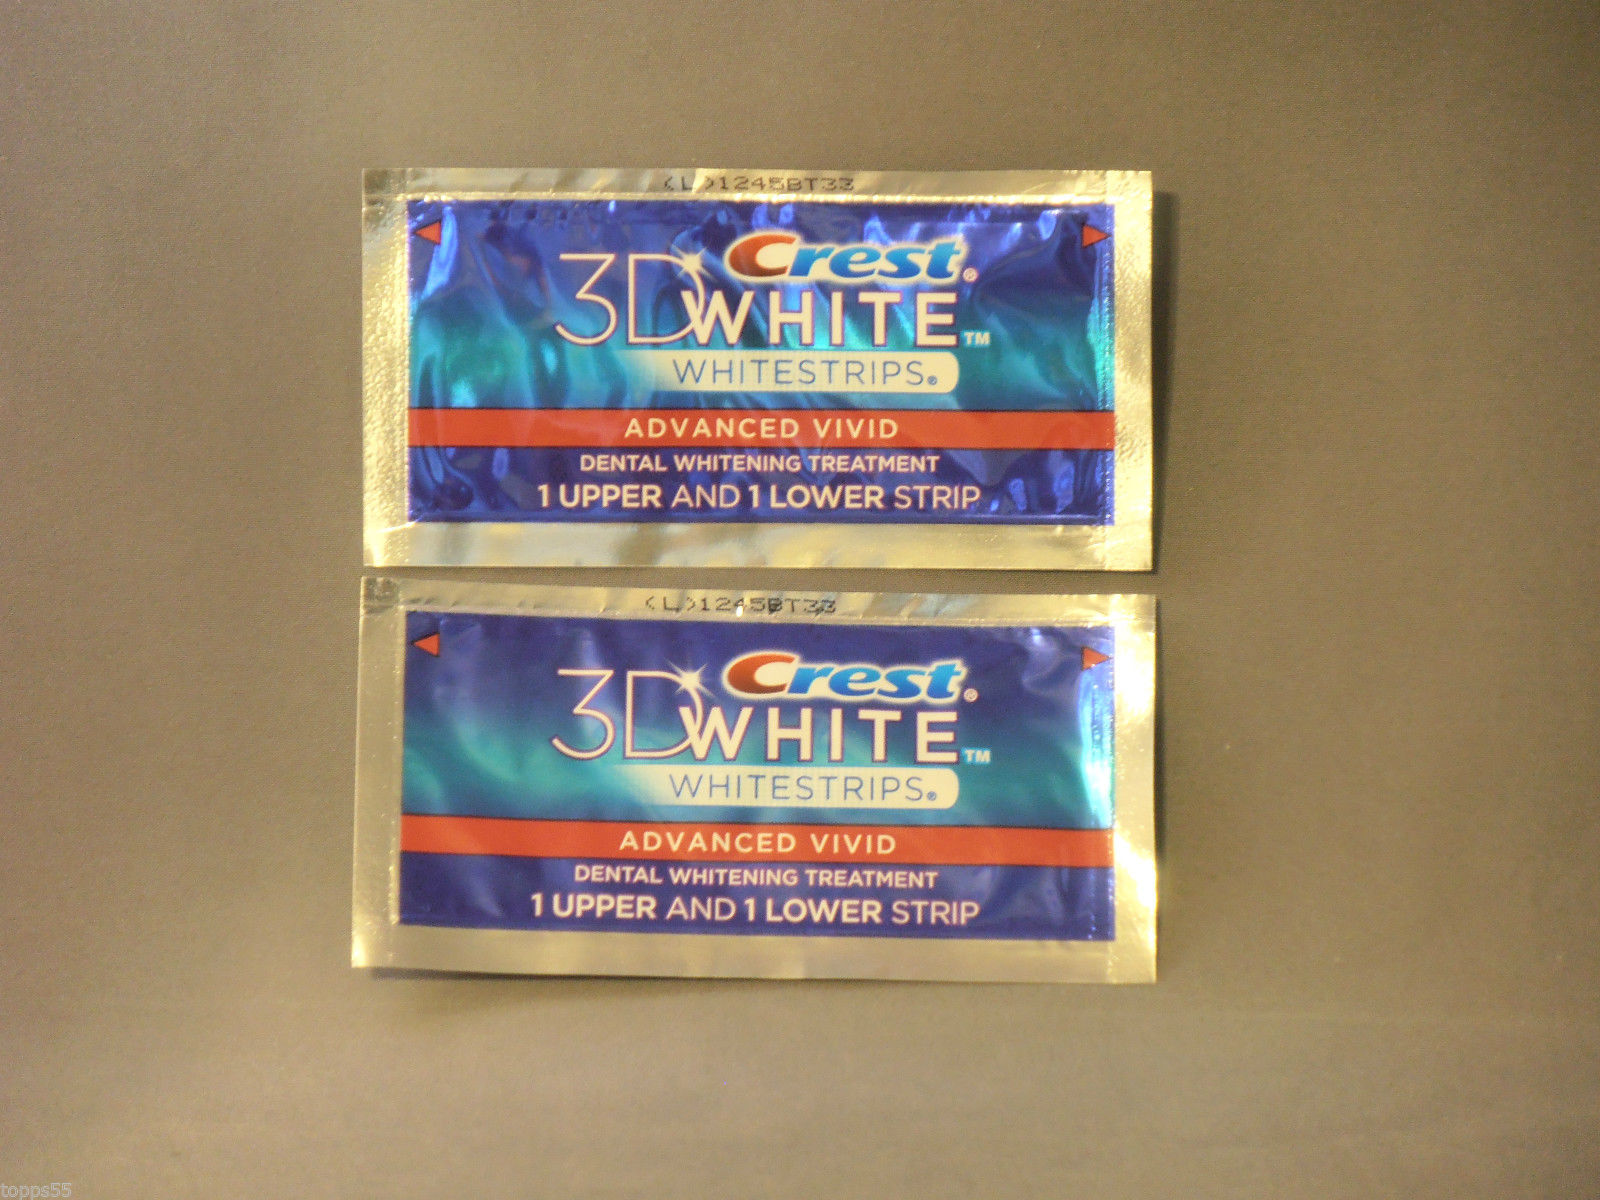 New Crest 3D Dental Whitestrips Advanced Vivid 4 Whitening Strips in 2 Pouches -- US Delivery